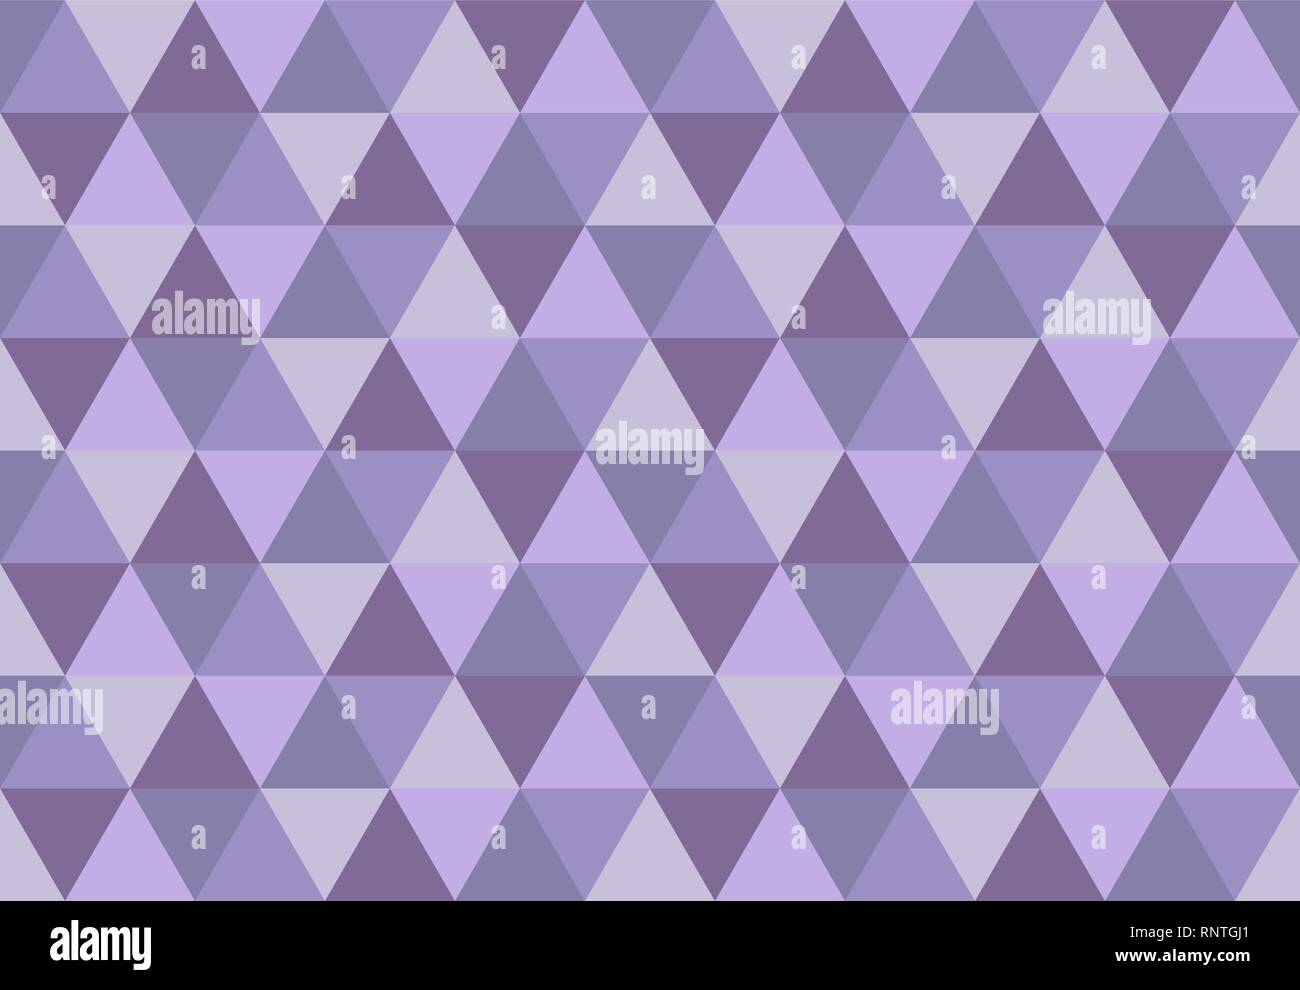 Violet triangular seamless pattern.Low poly geometric background. Violet, purple, lavender colors. Print design for textile, posters,flyers,T-shirts. Stock Vector